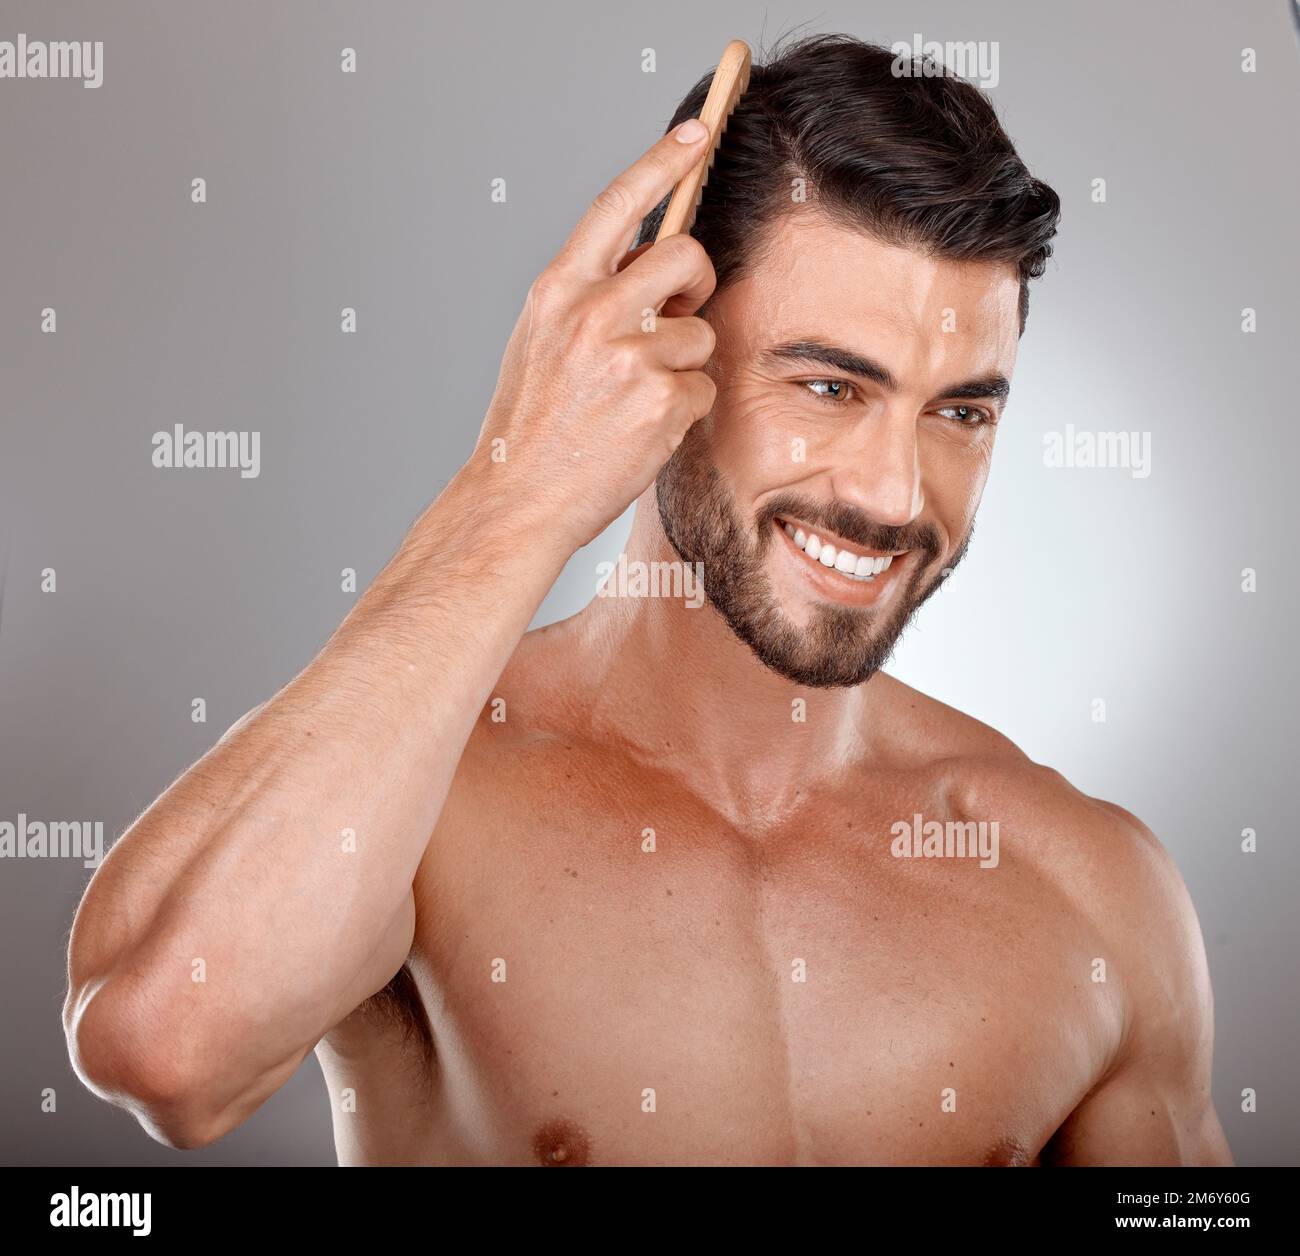 Comb, beauty or man brushing hair in grooming advertising or marketing salon hair care products. Happy, studio background or healthy male model smiles Stock Photo